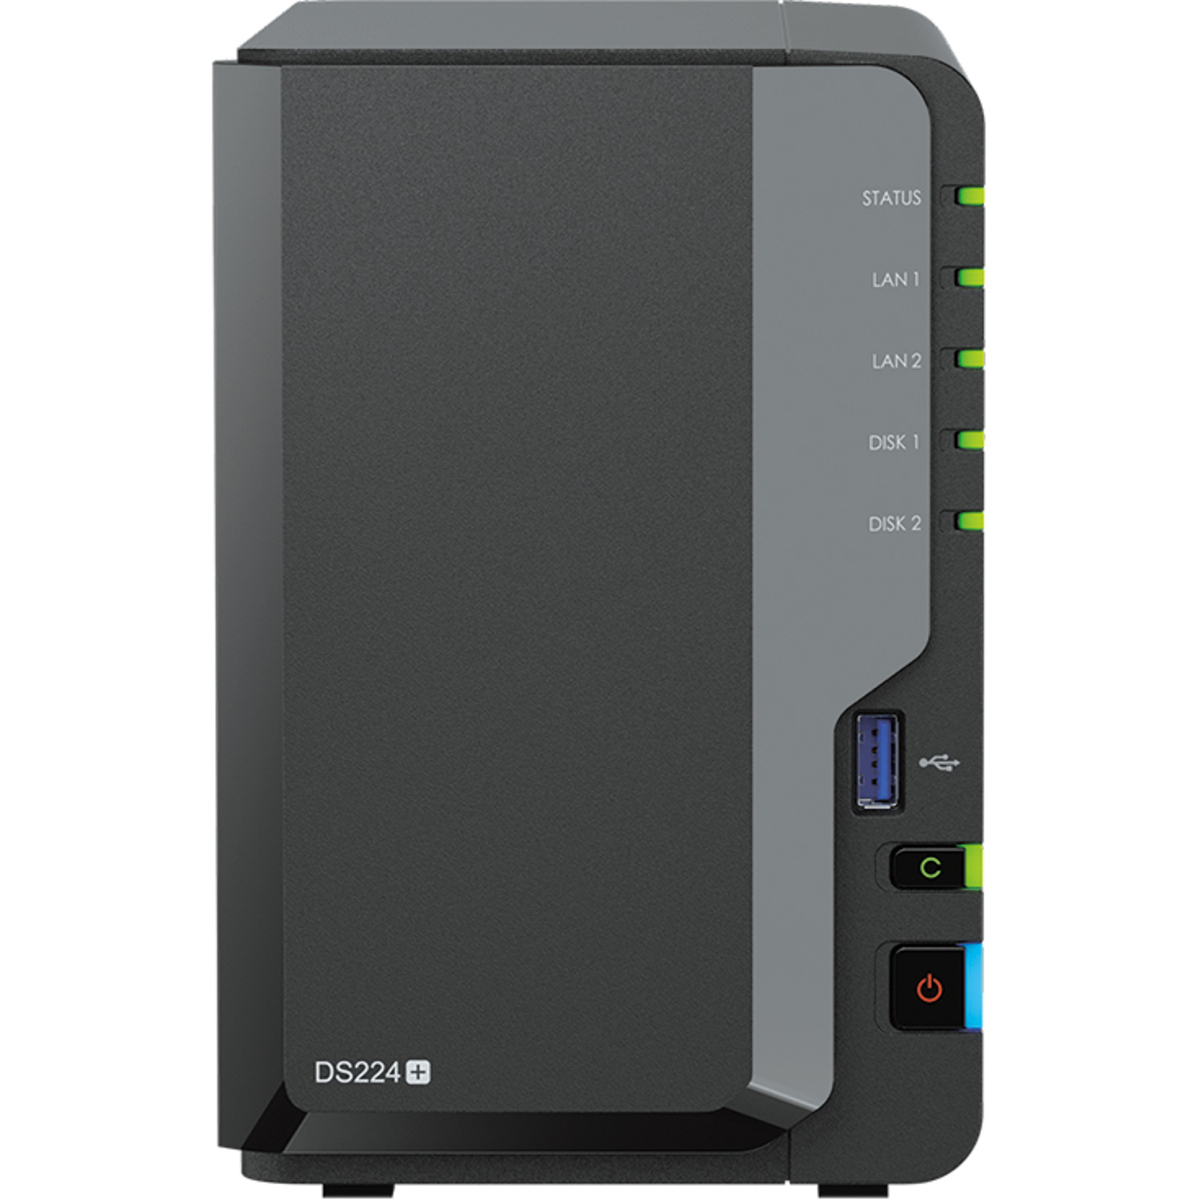 Synology DiskStation DS224+ 24tb 2-Bay Desktop Personal / Basic Home / Small Office NAS - Network Attached Storage Device 2x12tb Seagate IronWolf Pro ST12000NT001 3.5 7200rpm SATA 6Gb/s HDD NAS Class Drives Installed - Burn-In Tested - ON SALE - FREE RAM UPGRADE DiskStation DS224+